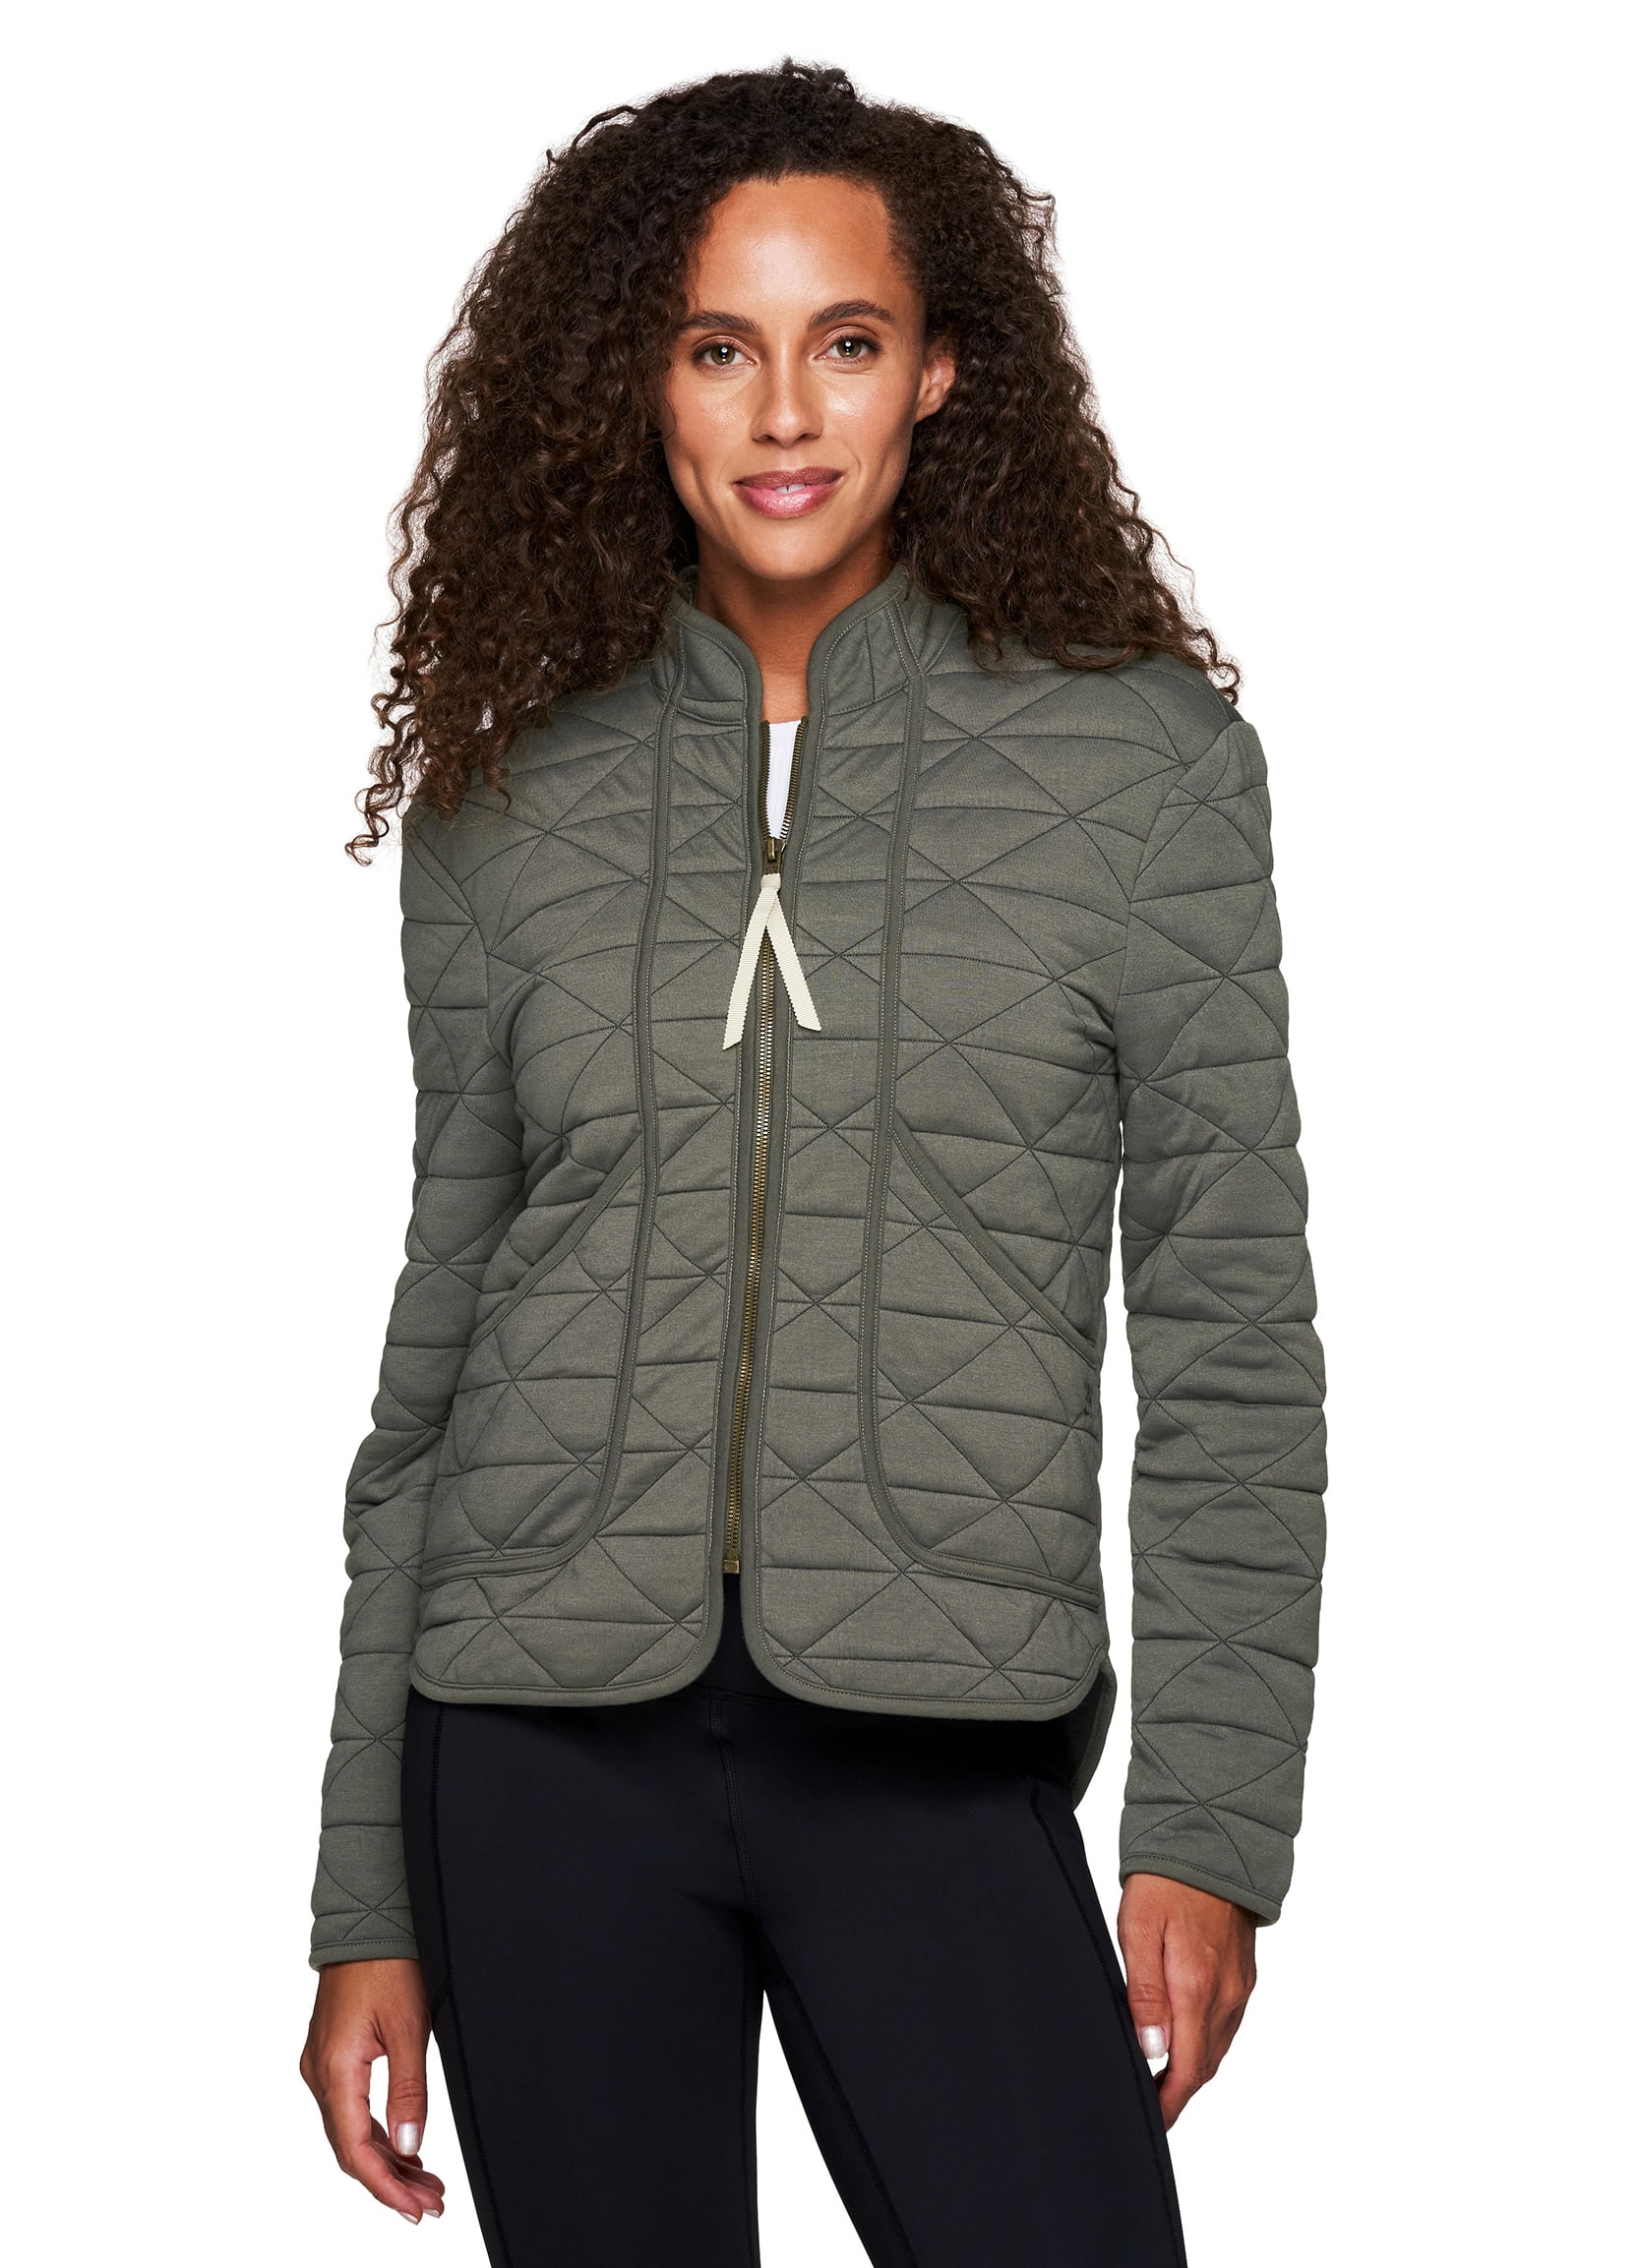 Avalanche Women's Lightweight Quilted Jacket With Pockets - Walmart.com